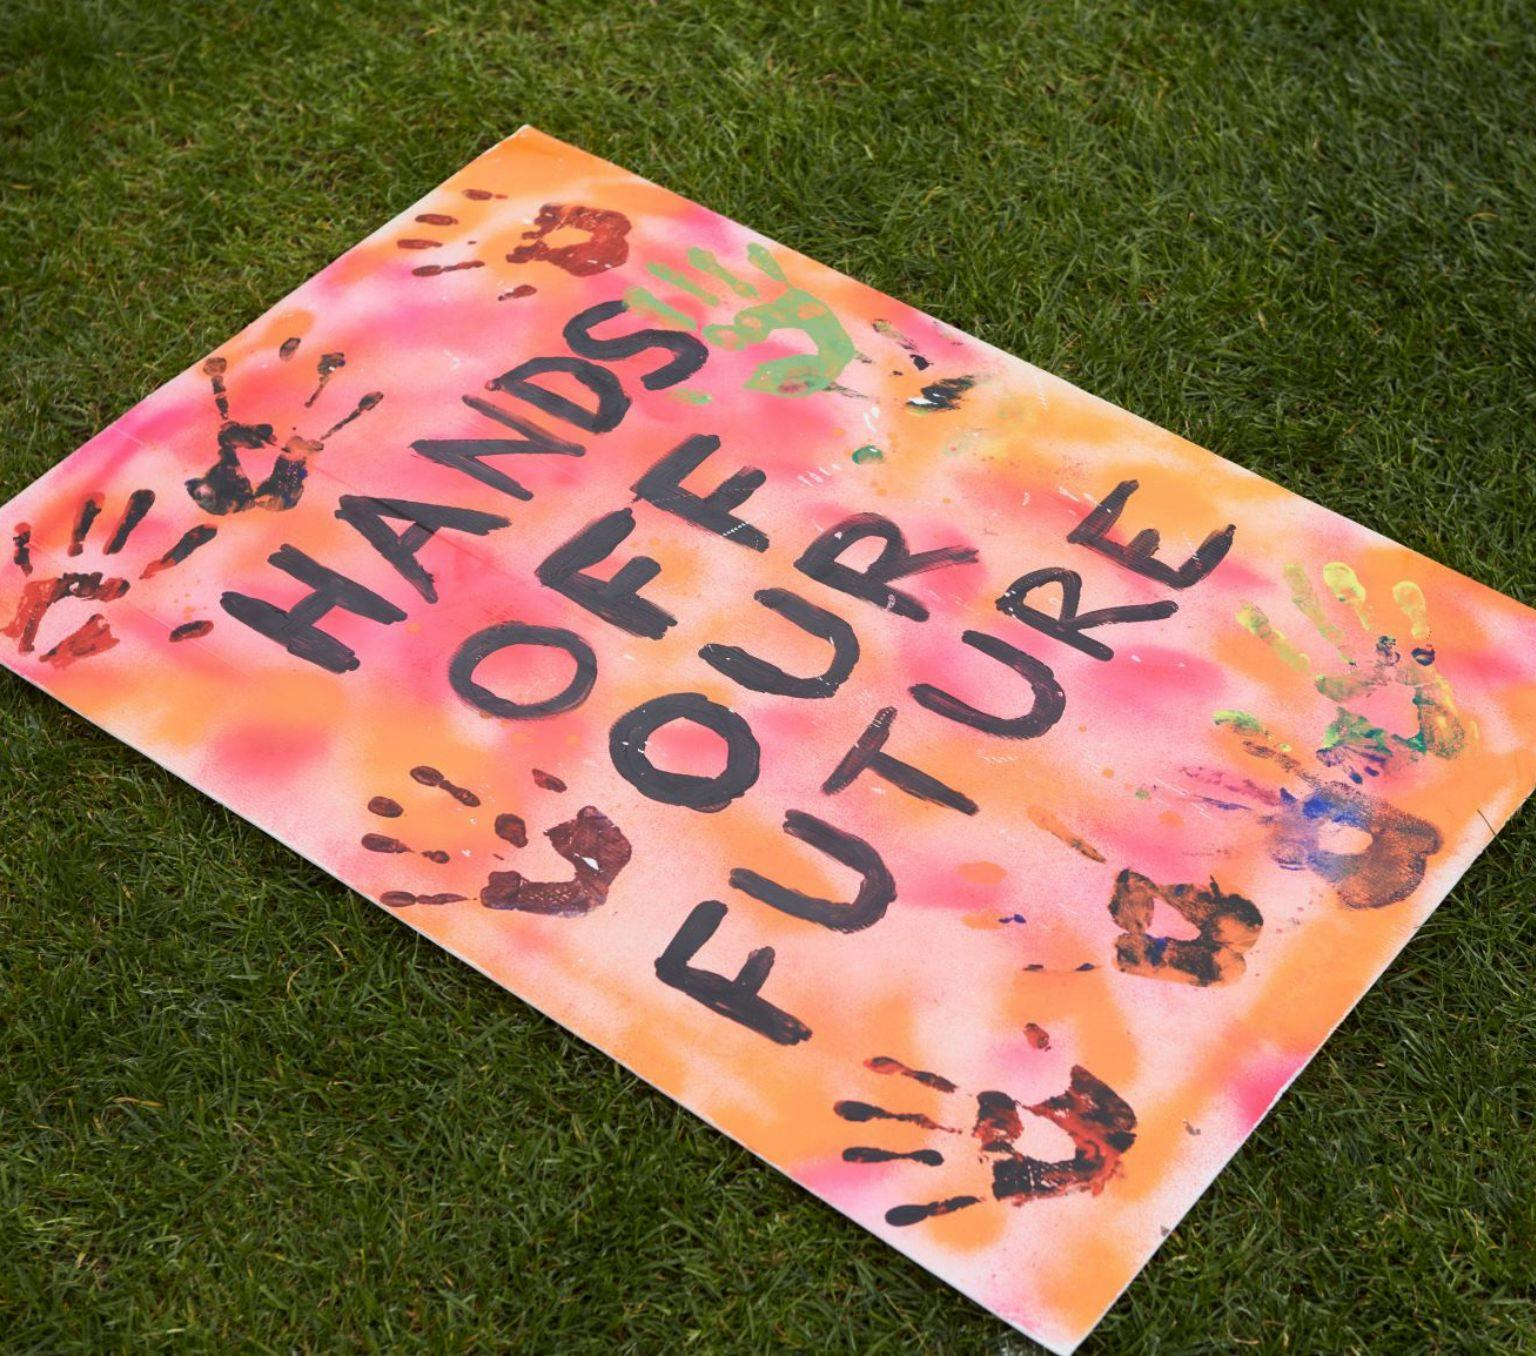 Handmade sign reading 'HANDS OFF OUR FUTURE".